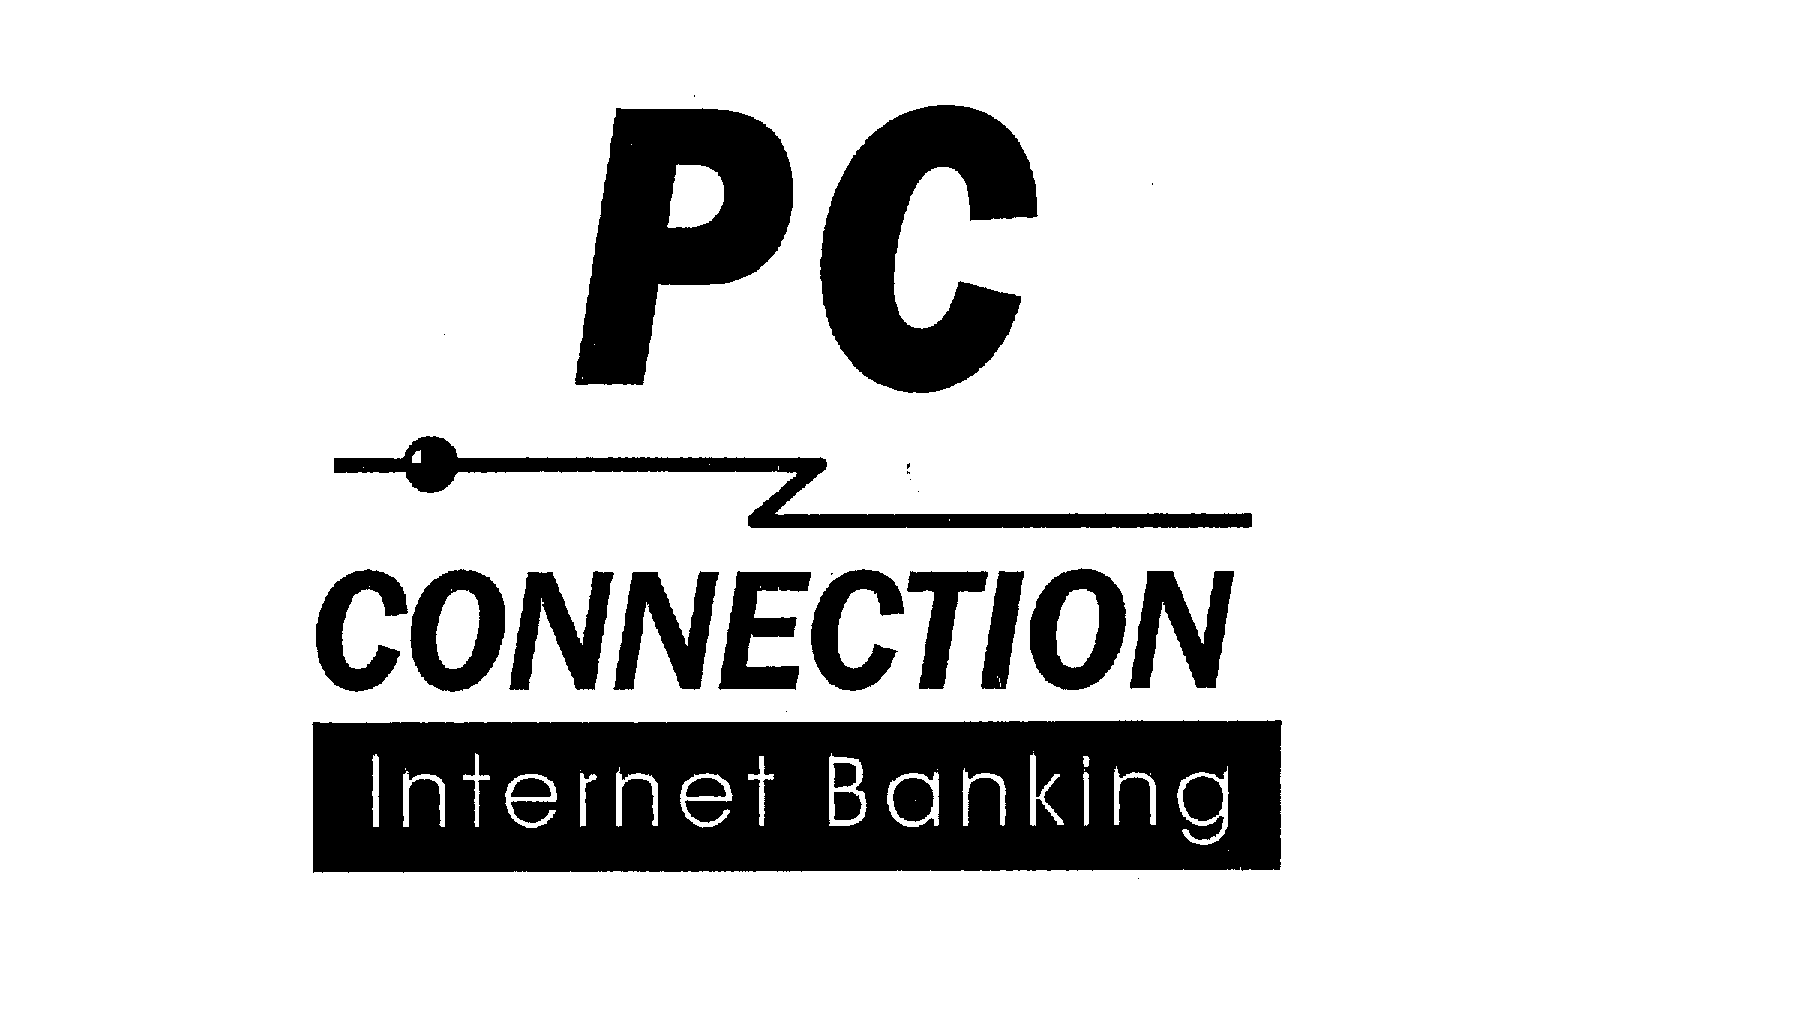  PC CONNECTION INTERNET BANKING